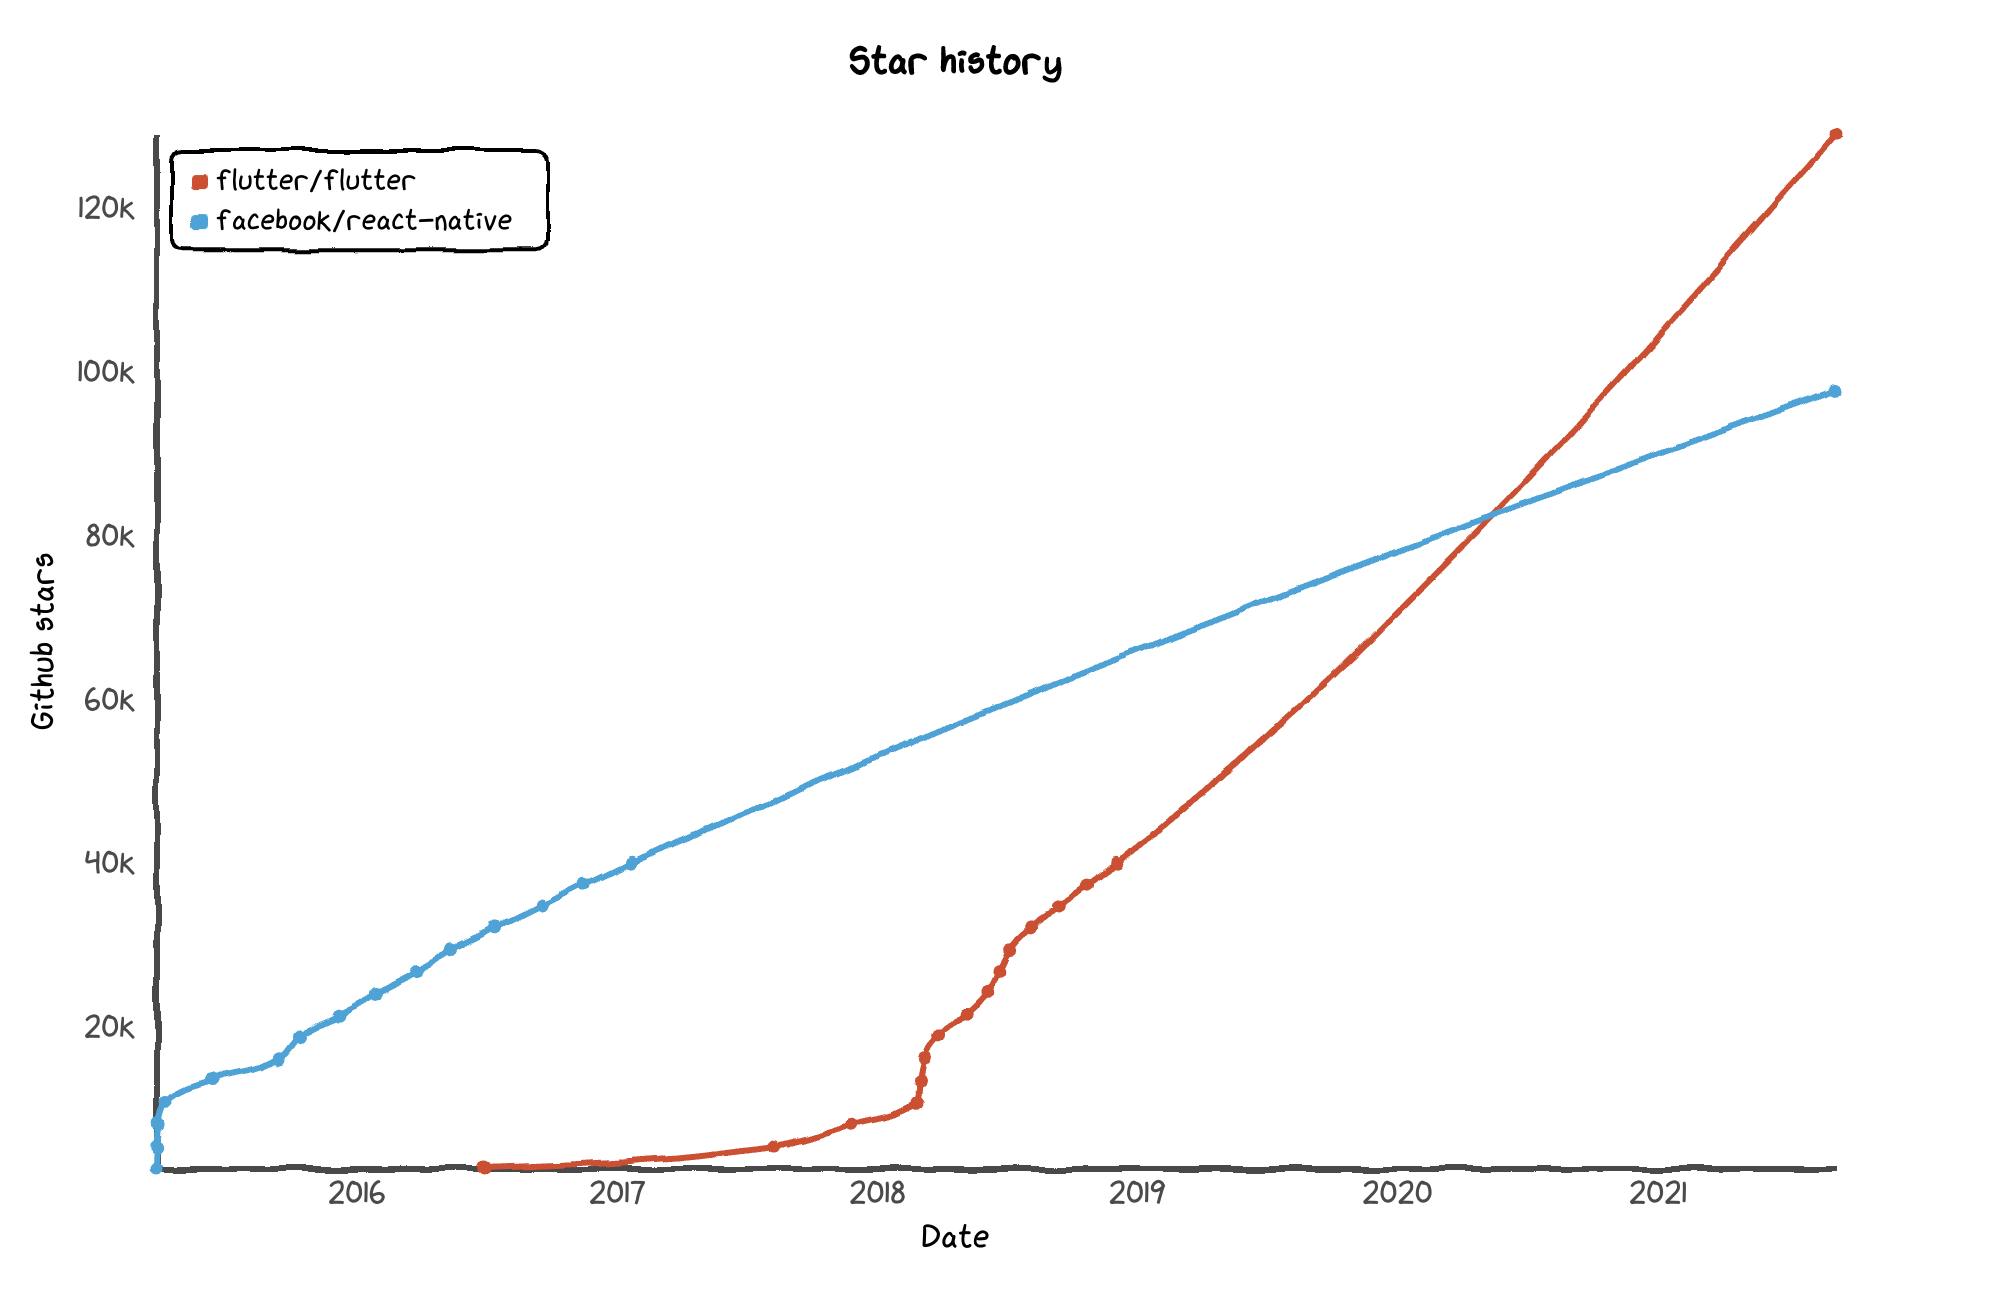 GitHub Star count graph for React Native and Flutter